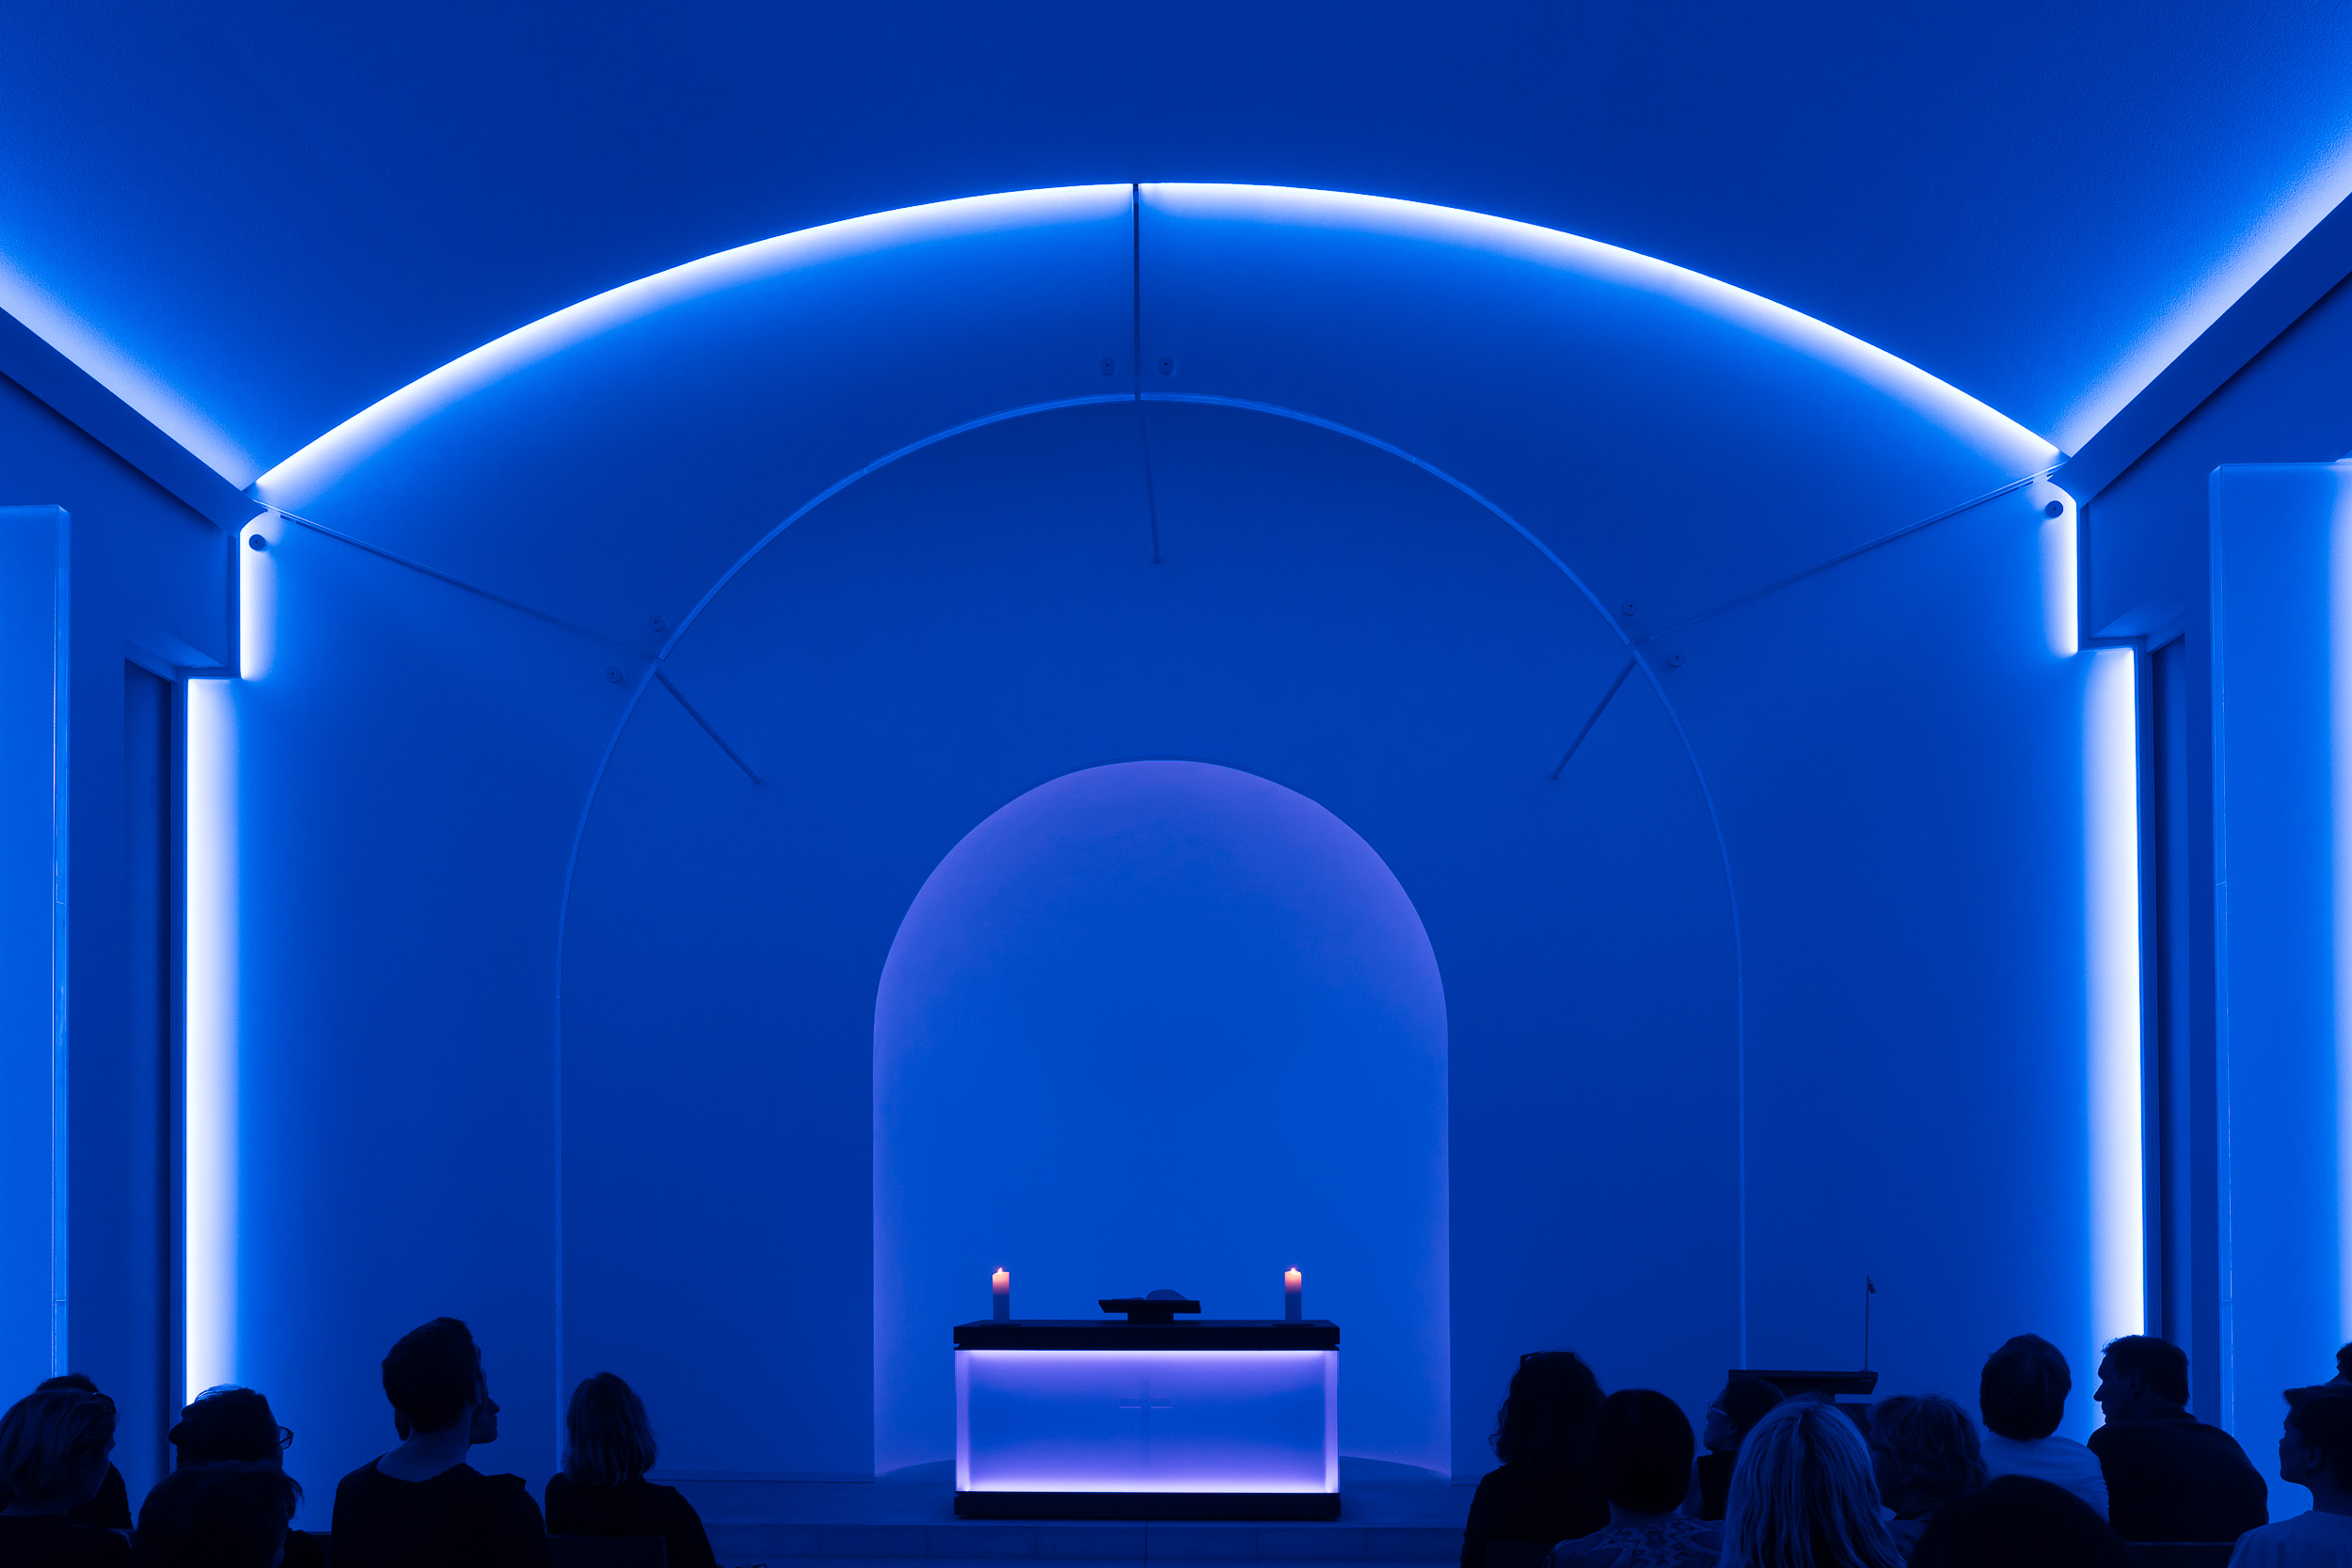 The interior of a chapel, illuminated with bluish light , made for a very tranquil and contemplative scene in a cemetery in Berlin, Germany .